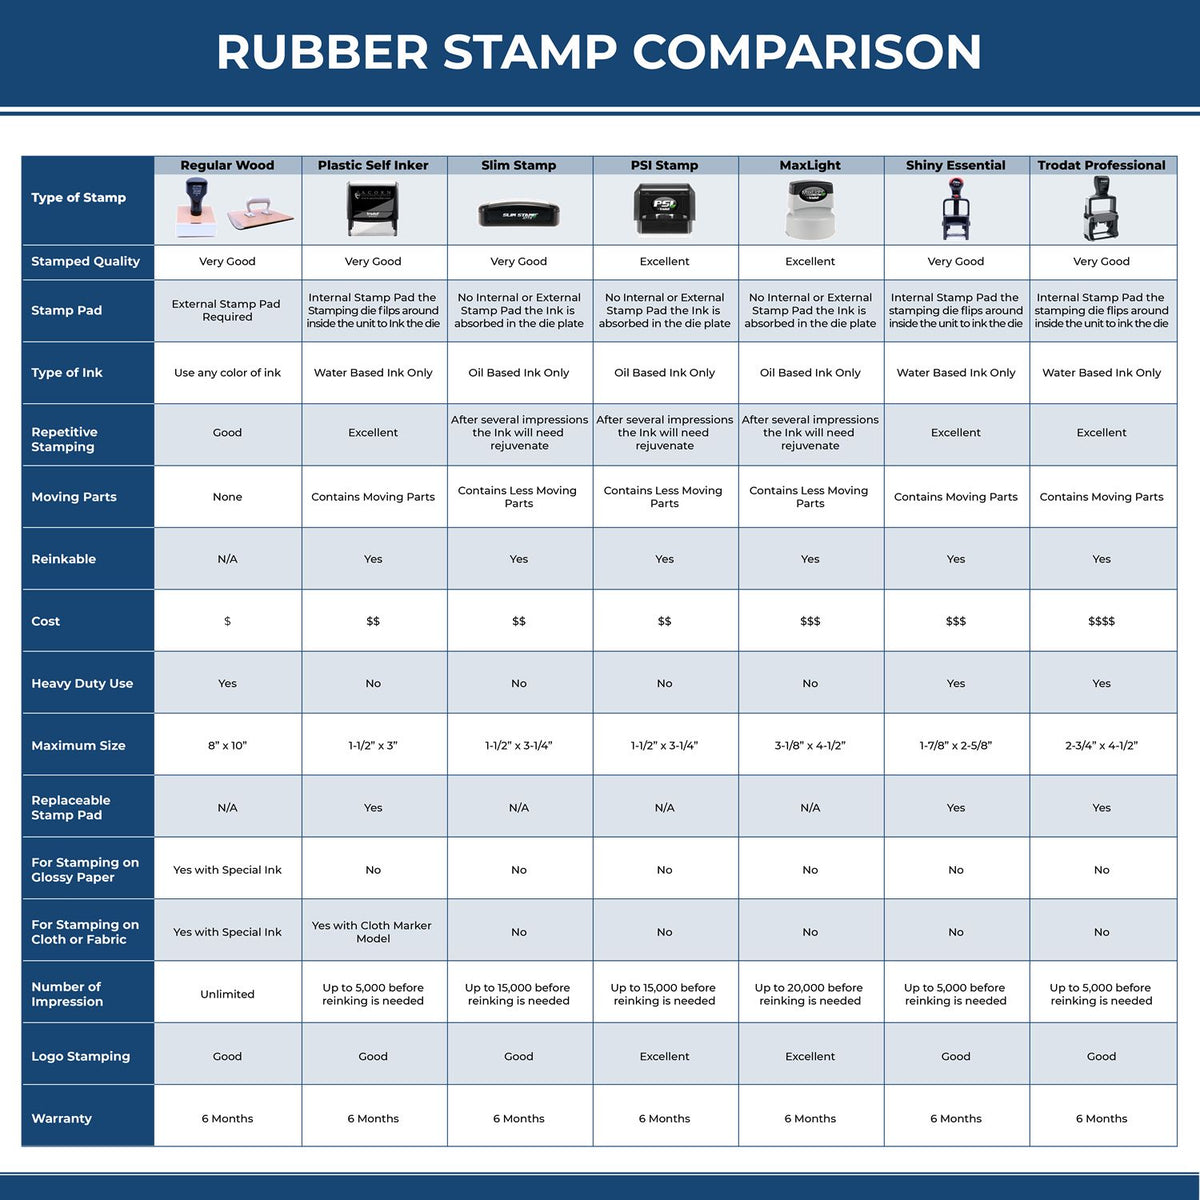 Large Pre-Inked Rush with Rabbit Stamp 5665SLIM Rubber Stamp Comparison